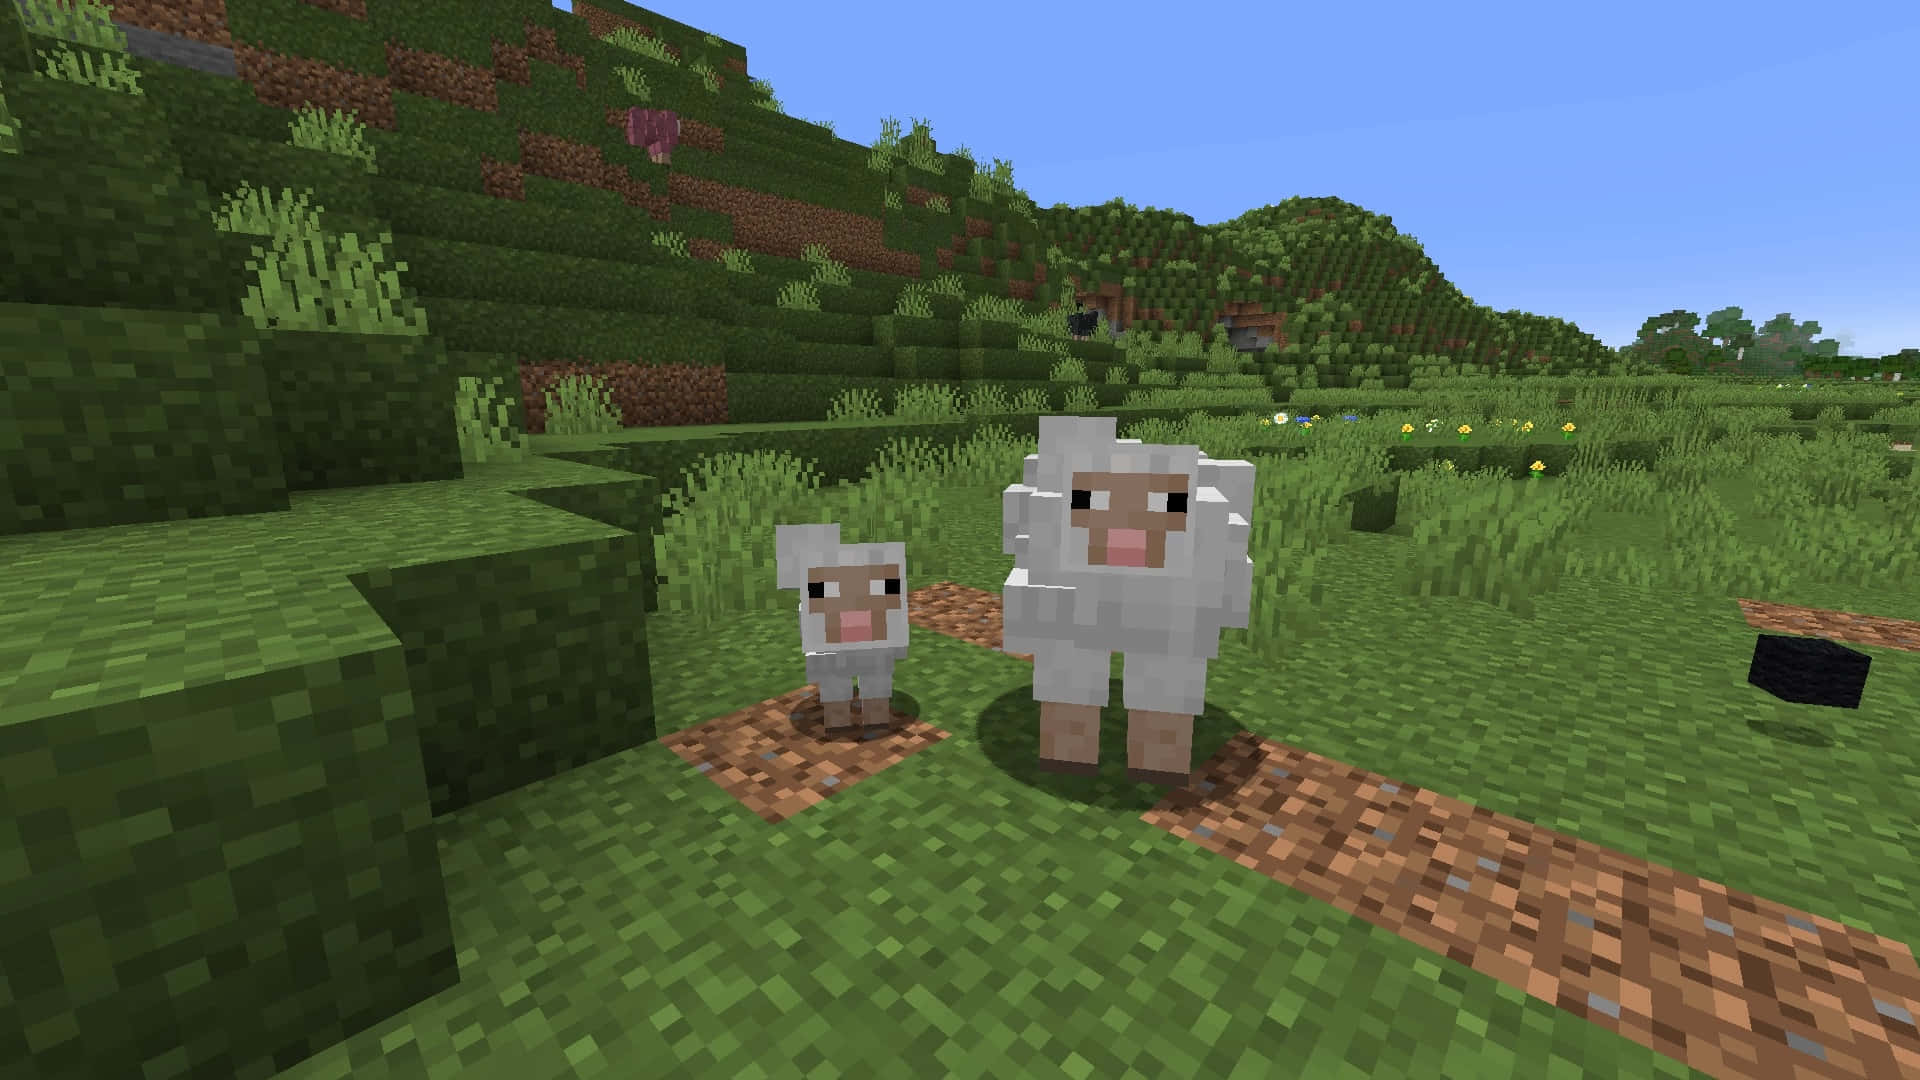 Minecraft sheep frolicking in the pixelated landscapes. Wallpaper